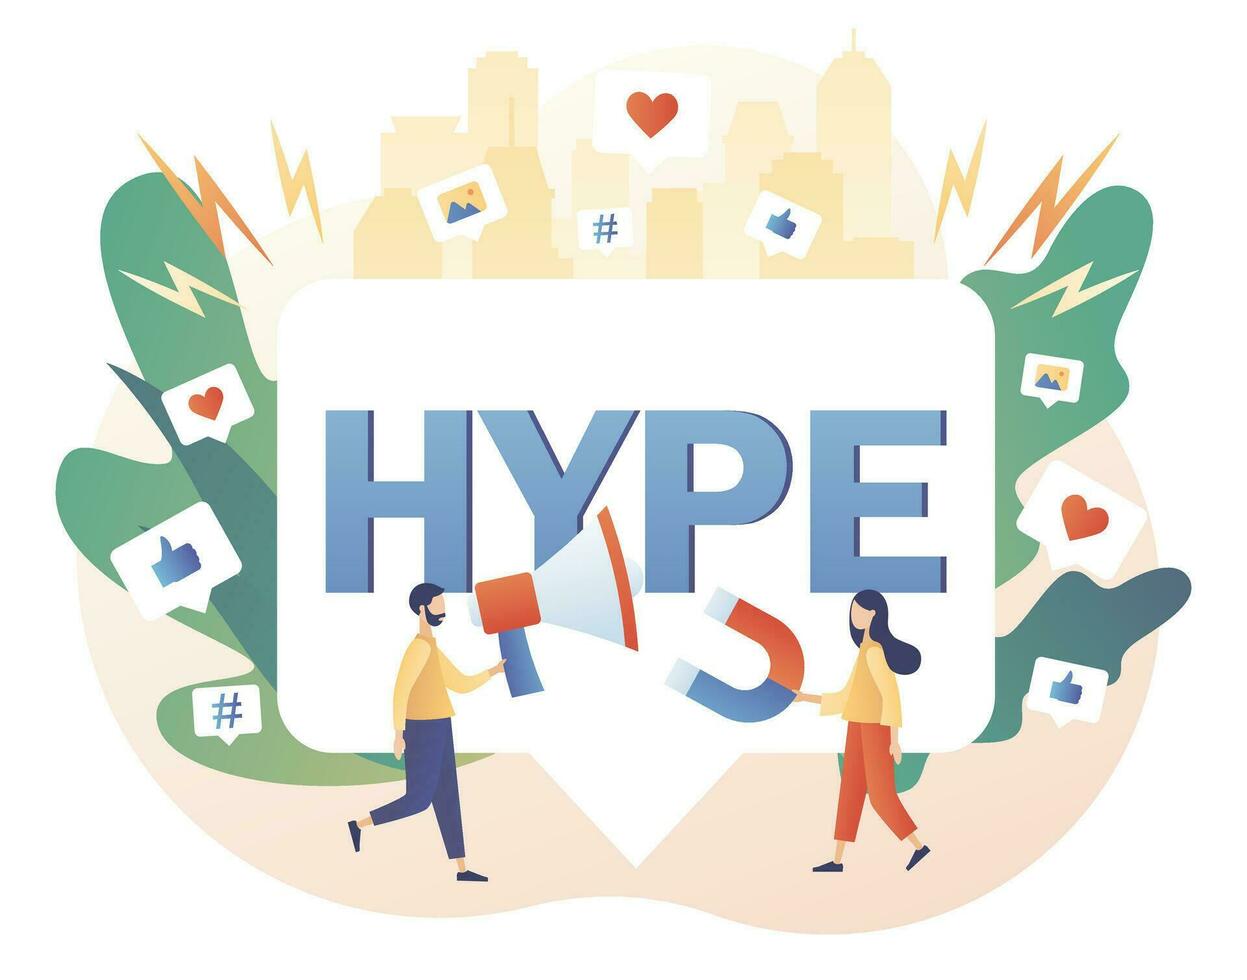 Hype marketing. Bloggers, celebrities, influencers need more likes. Tiny people following internet trends. Social media viral or fake content. Modern flat cartoon style. Vector illustration